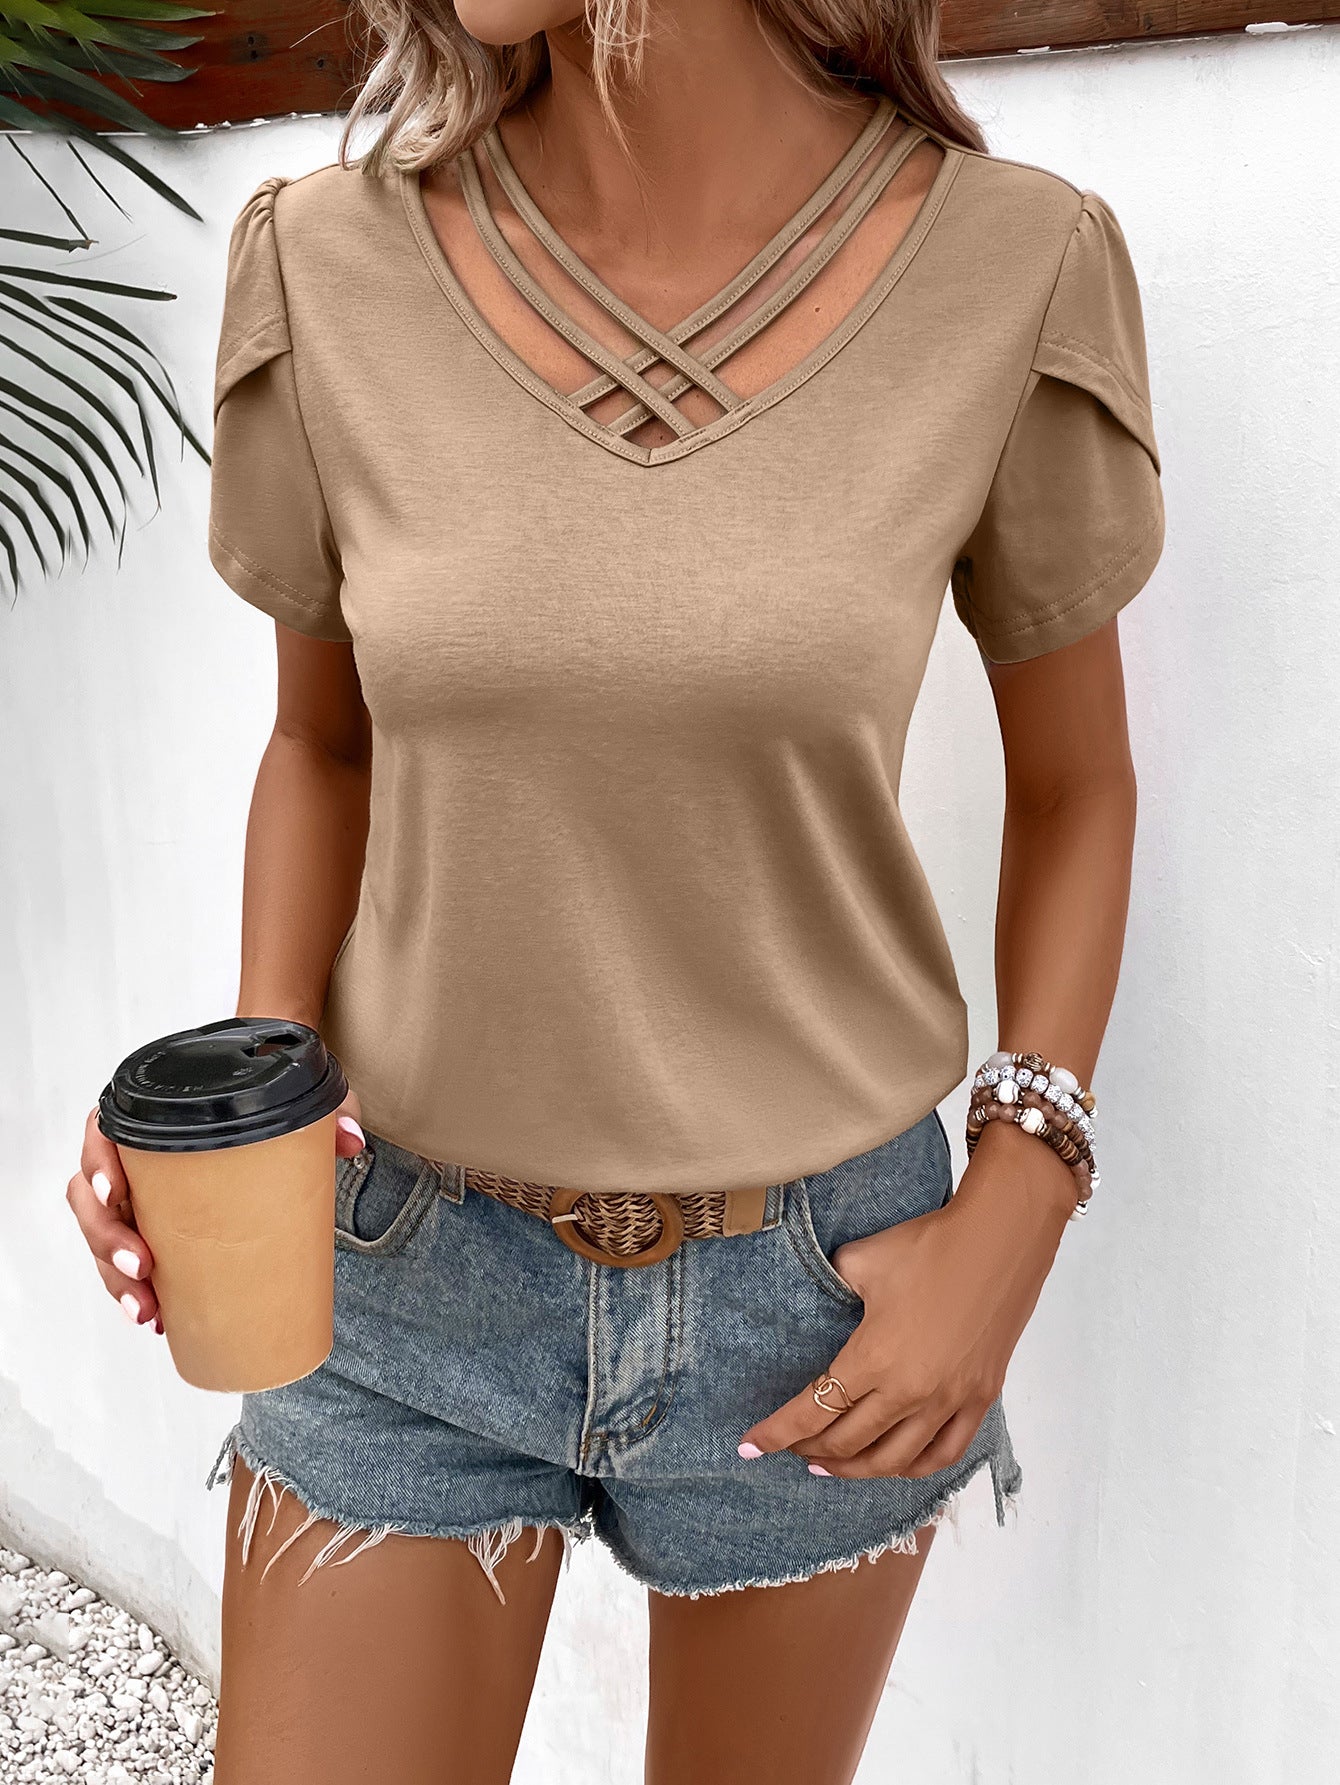 Strappy V-Neck Petal Sleeve Top - Kawaii Stop - Chic Style, Easy Care, Elegant, Highly Stretchy, Petal Sleeve, Polyester Blend, Regular Length, Ship From Overseas, Short Sleeve Shirt, T-Shirt, T-Shirts, Tee, V-Neck Top, Versatile, Women's Clothing, Women's Fashion, Women's Top, Y&BL